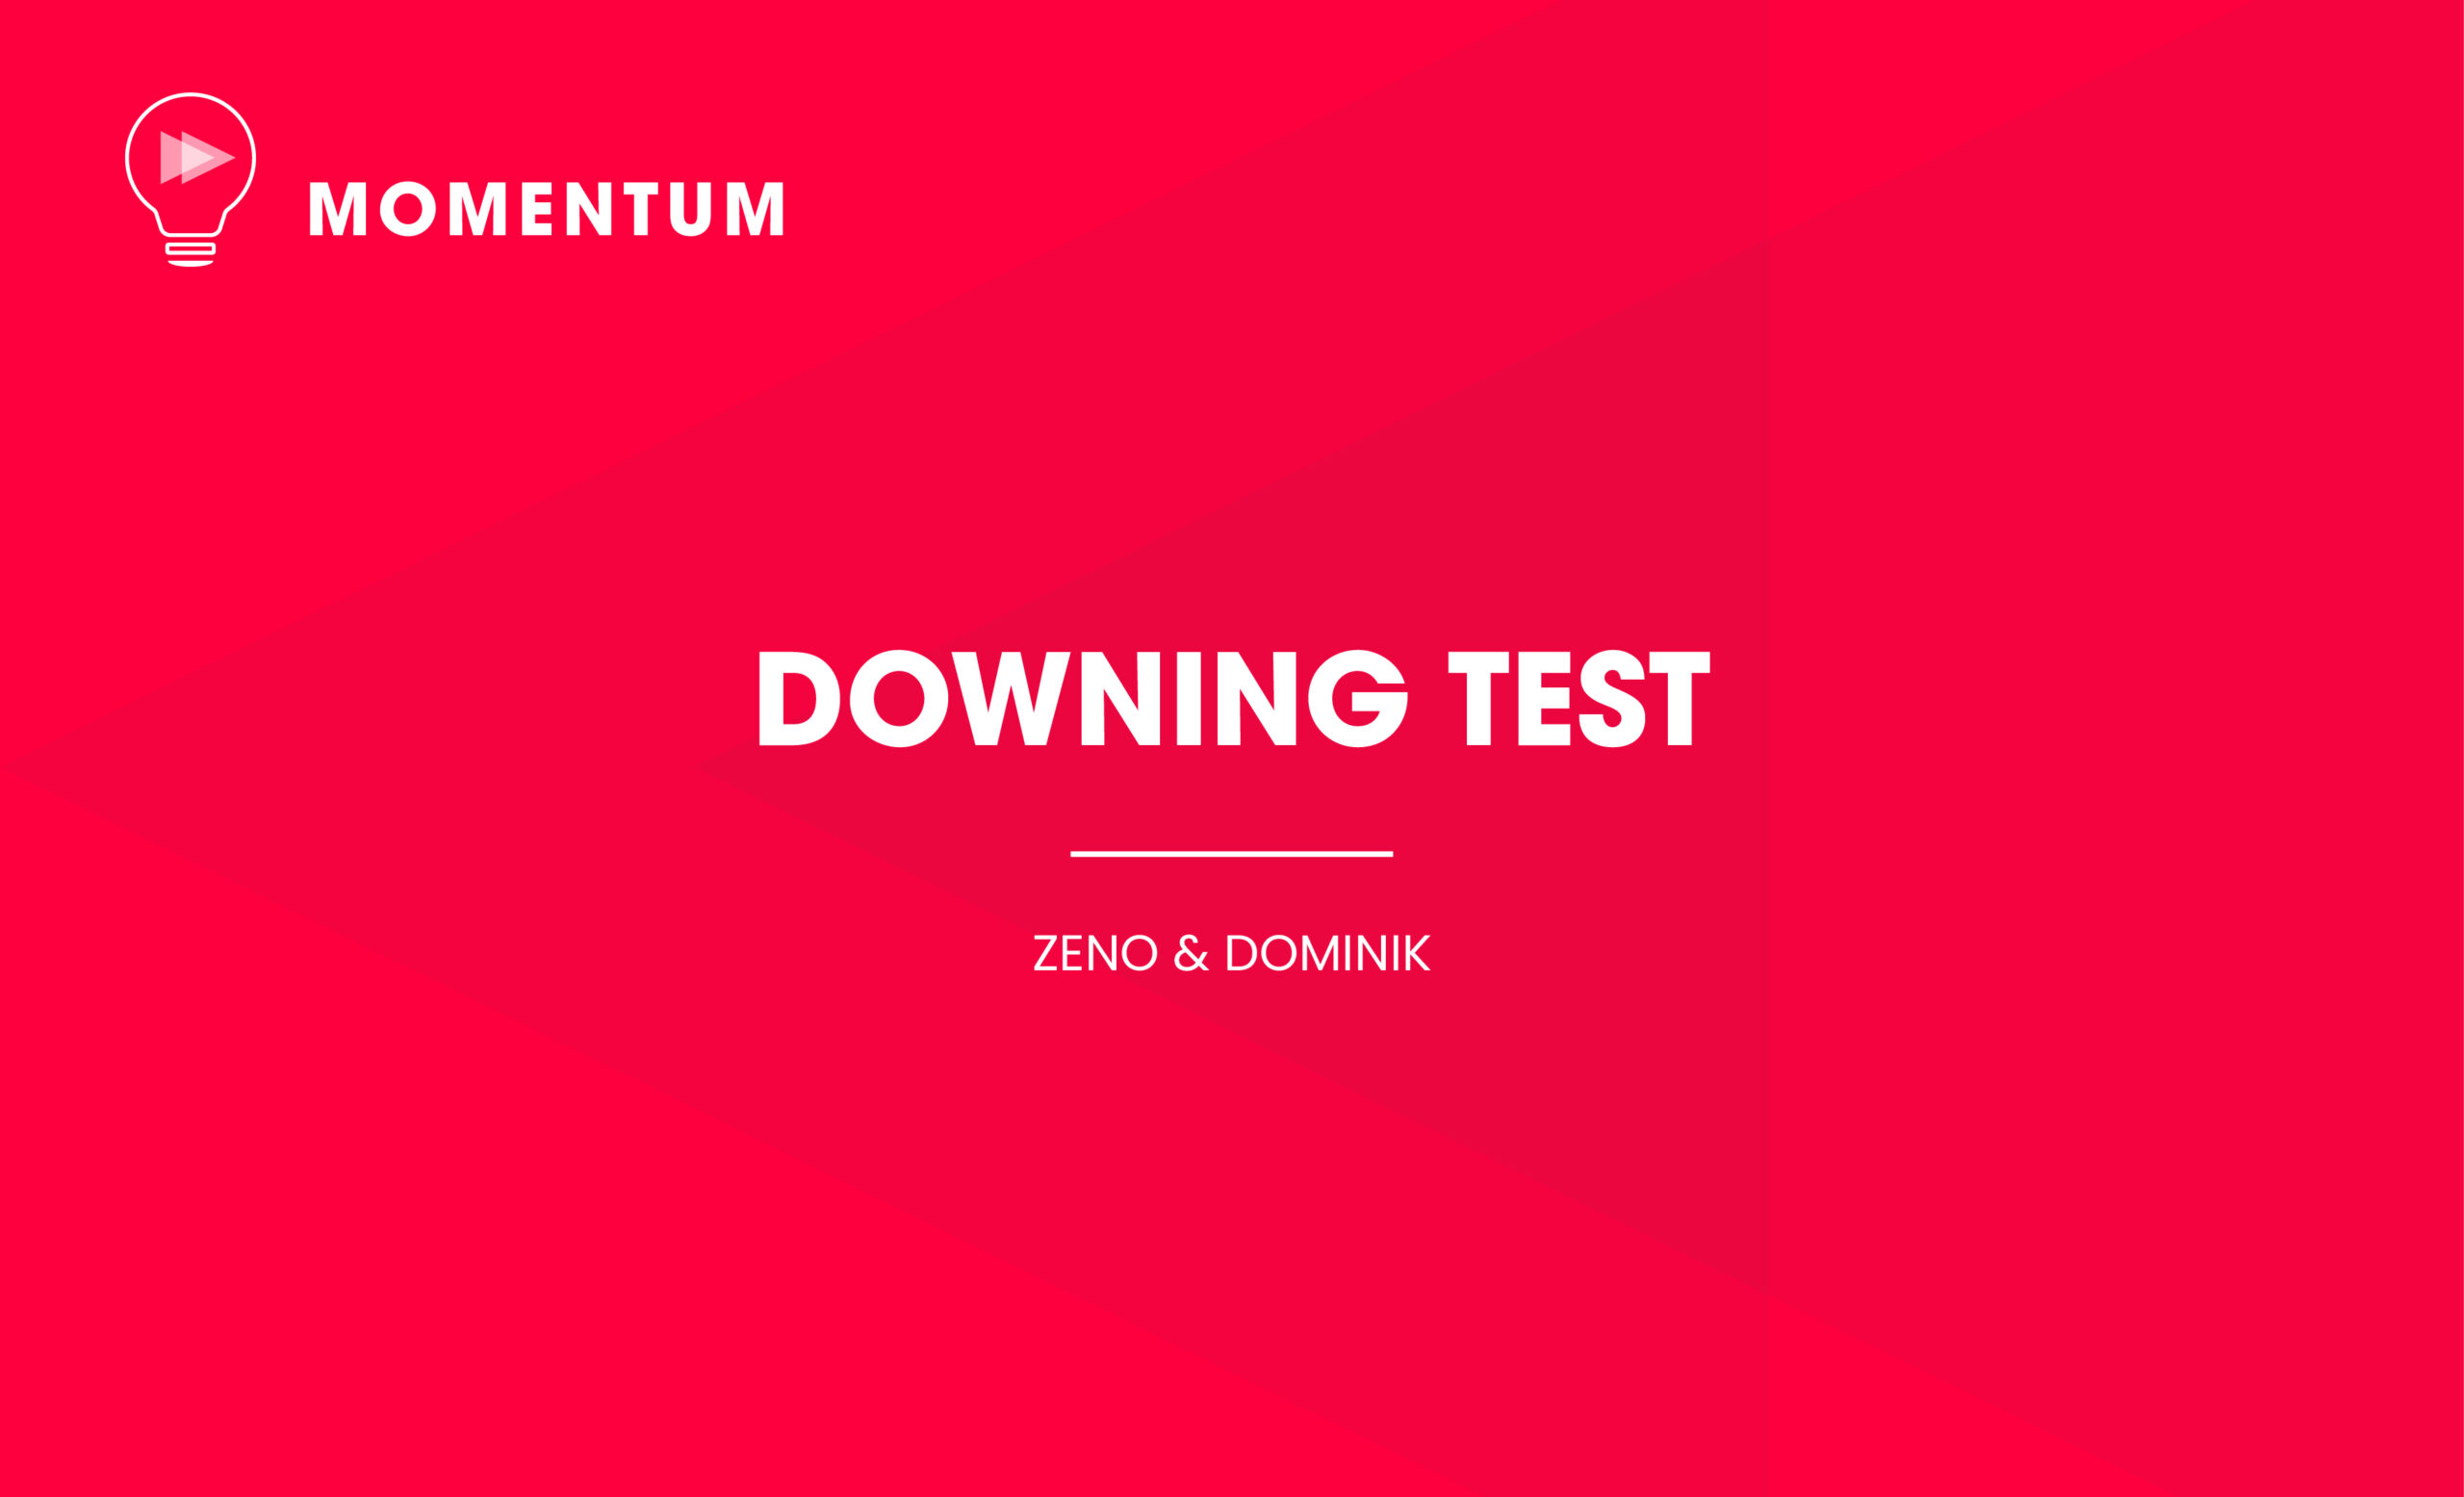 Downing Test